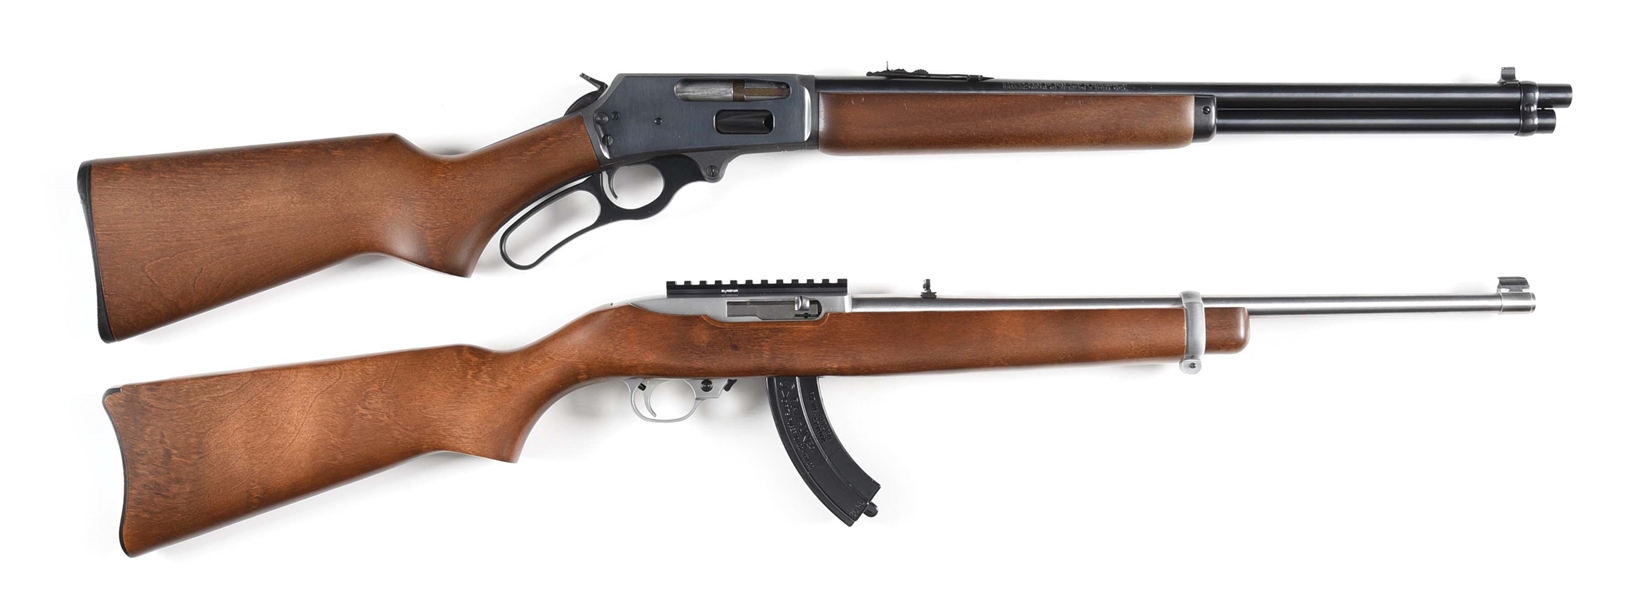 (M) LOT OF 2: MARLIN 30AS LEVER ACTION AND RUGER 10/22 SEMI AUTOMATIC RIFLES.